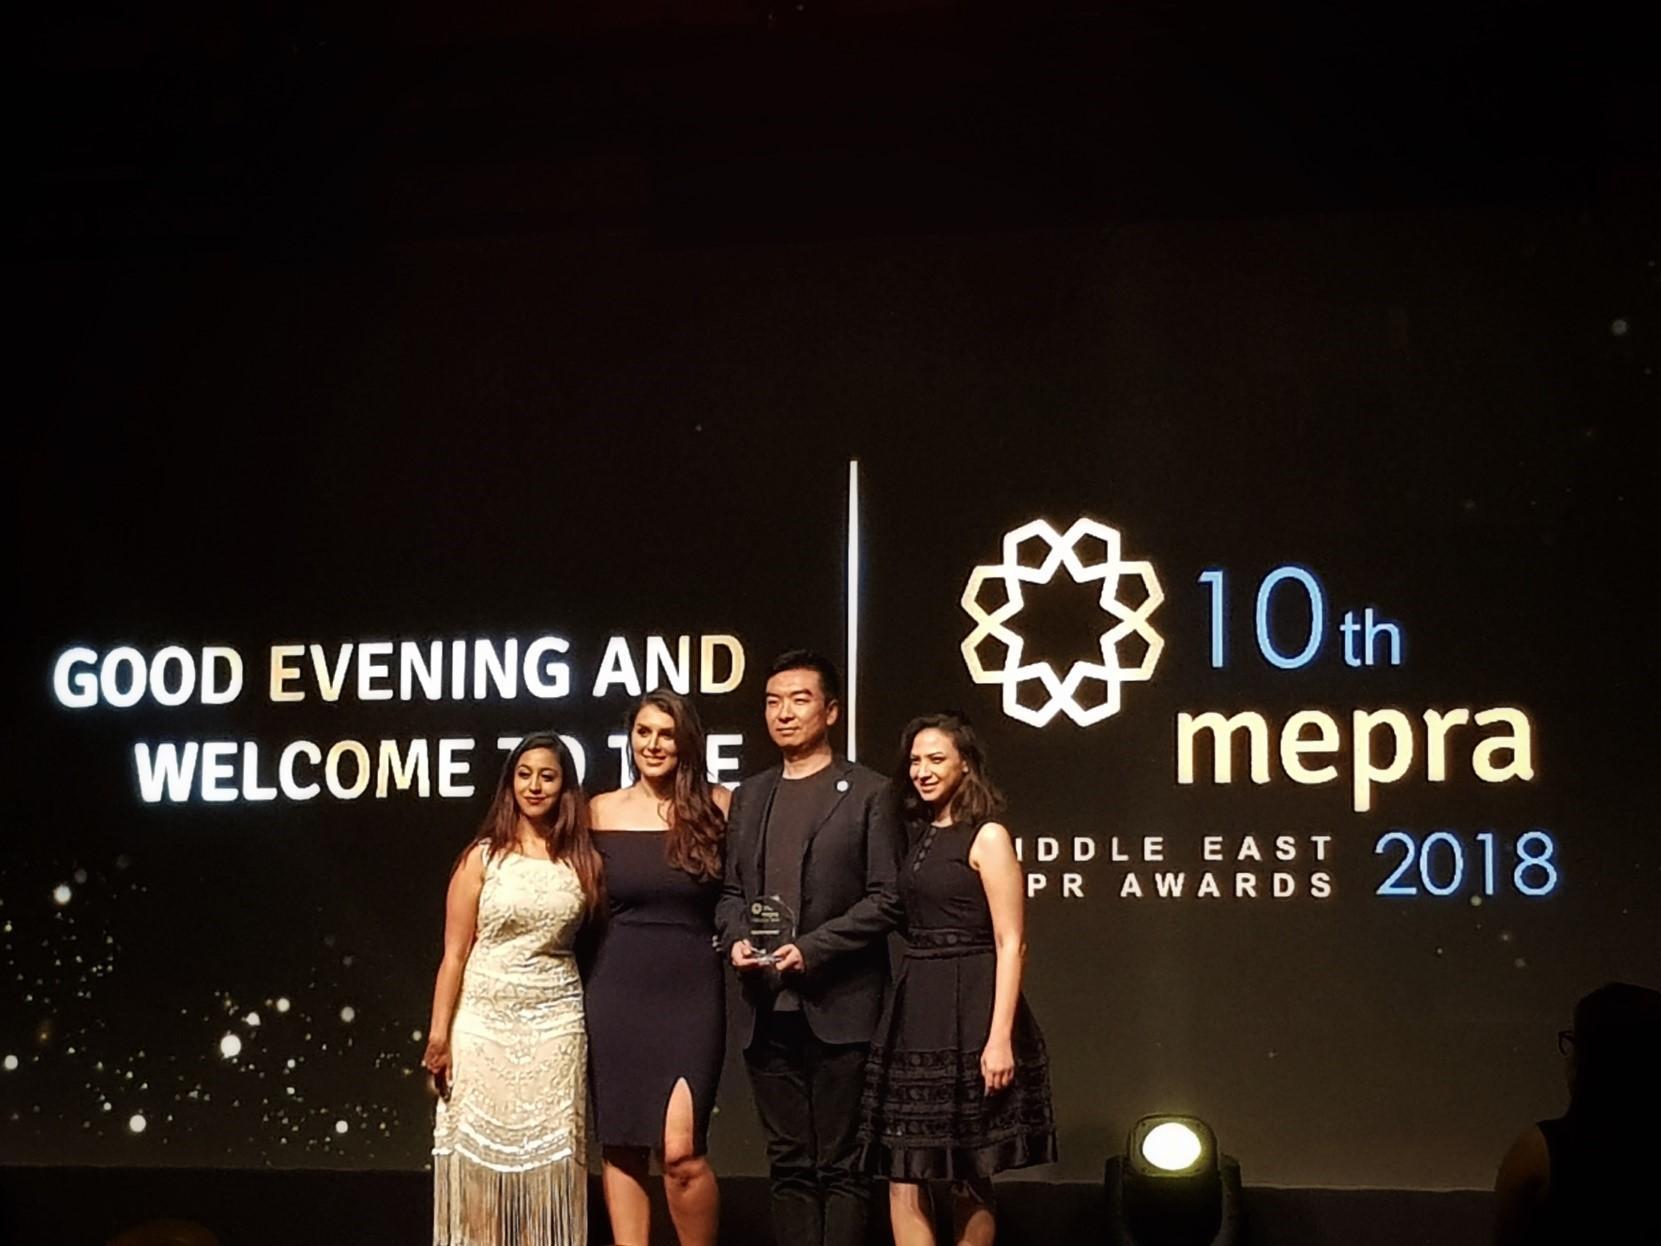 INFINIX’S “BEYOND INTELLIGENT” CAMPAIGN STANDS OUT TO WIN SILVER AWARD BY MEPRA